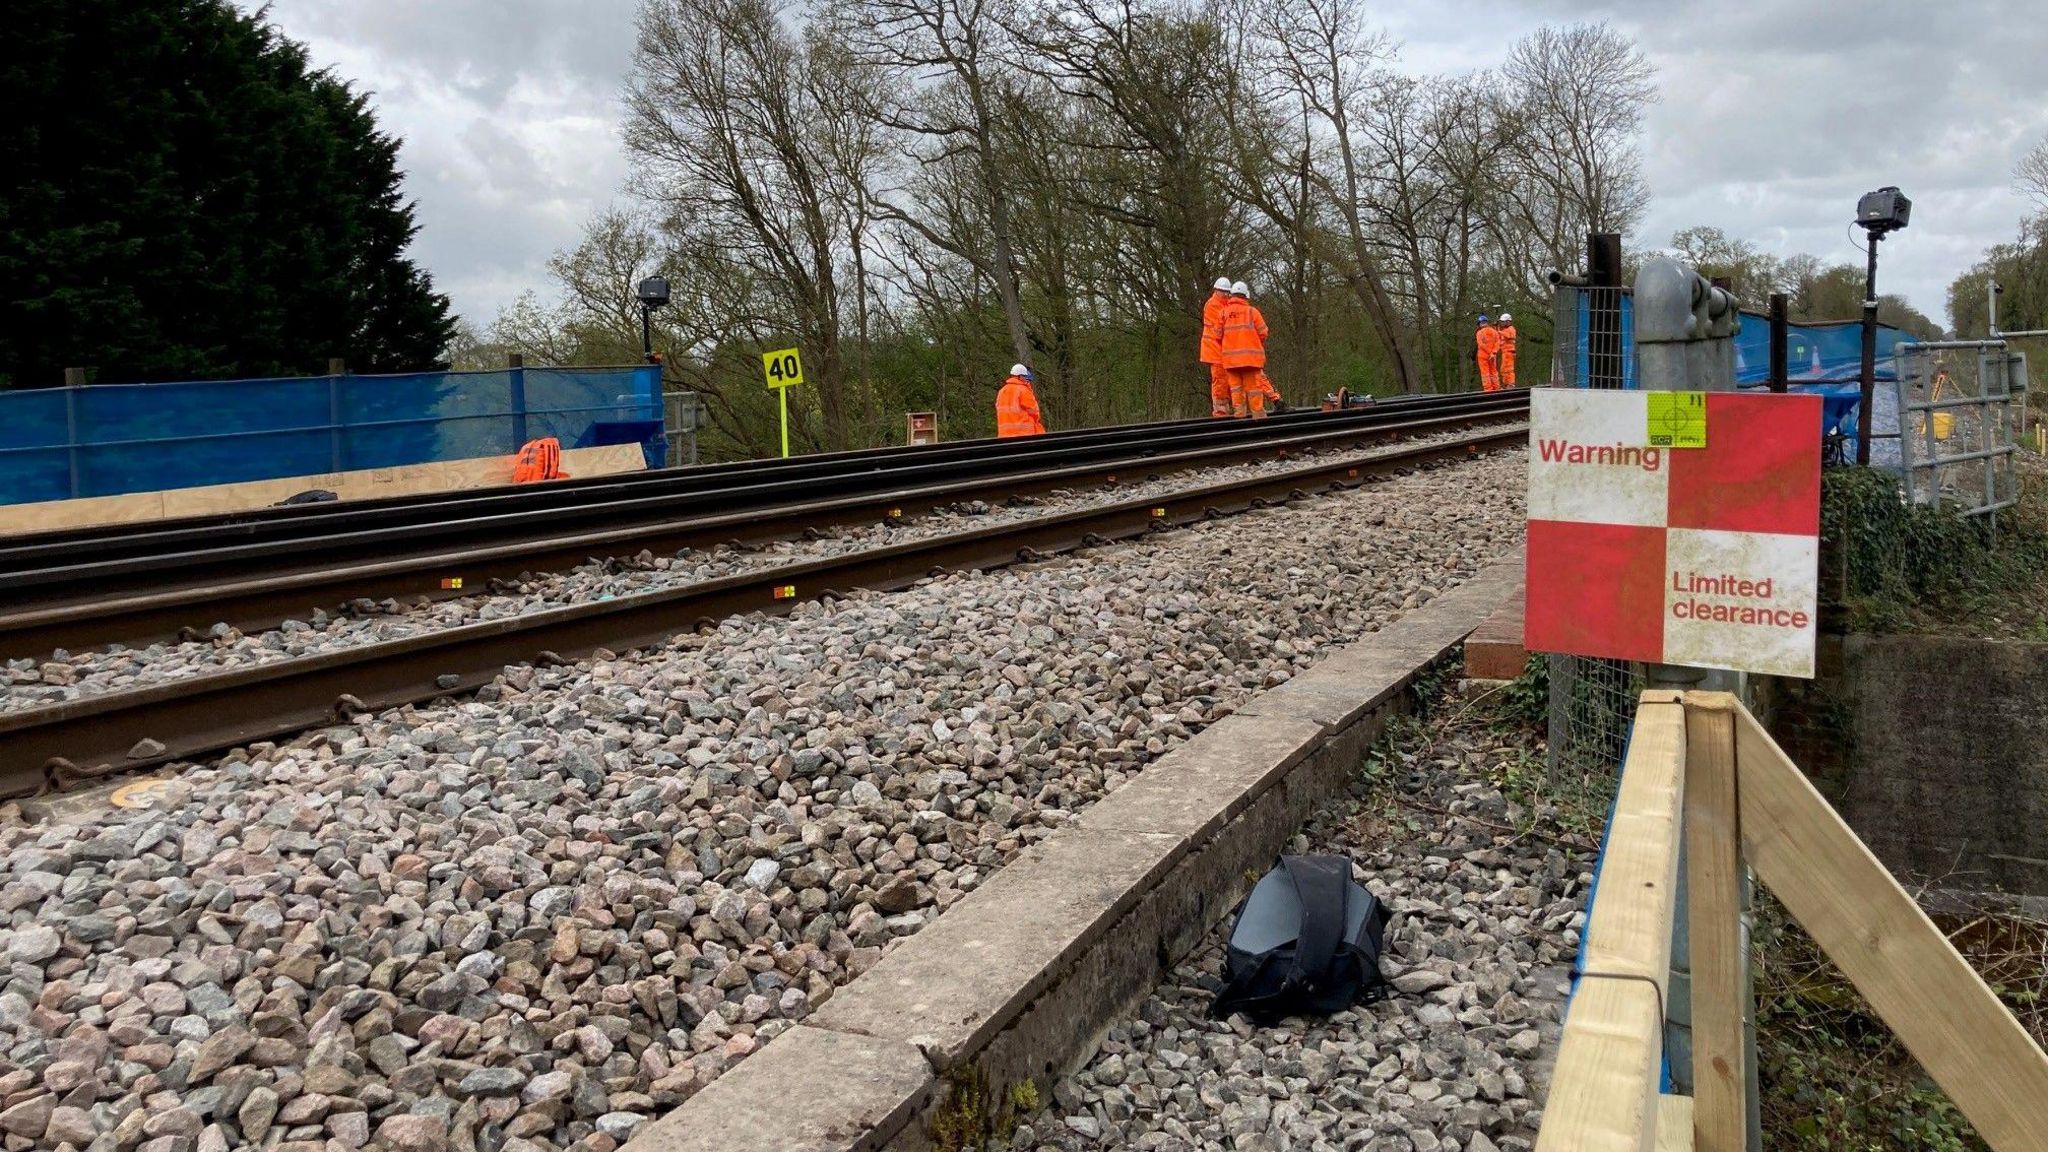 Network Rail staff in hi-vis clothing stand on railway lines at the Bough Beach embankment